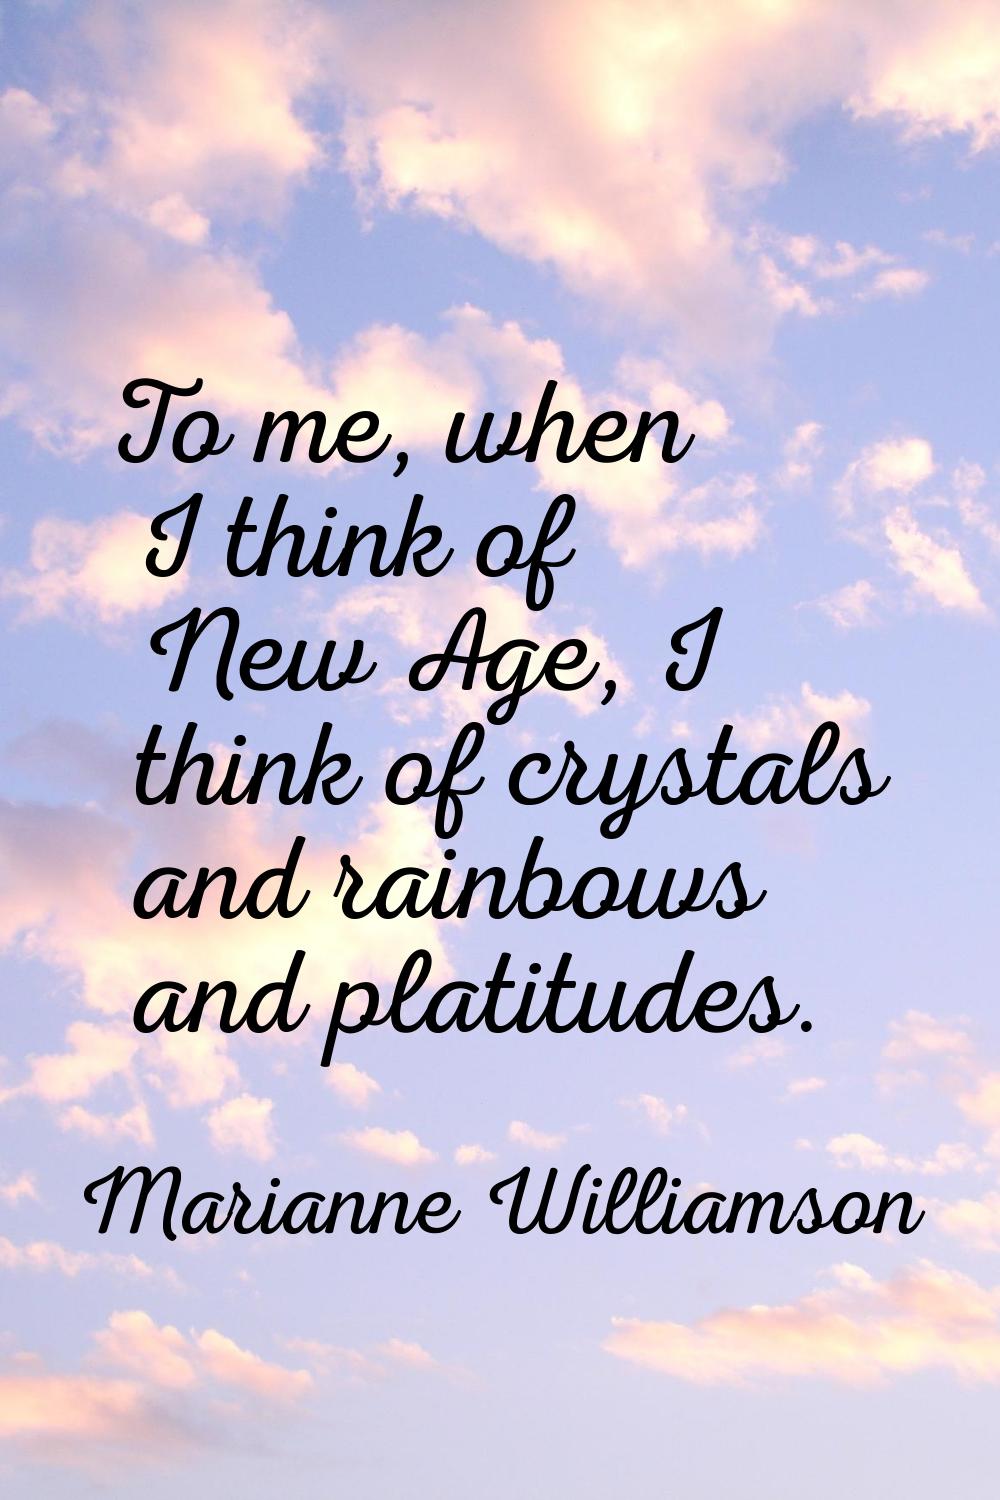 To me, when I think of New Age, I think of crystals and rainbows and platitudes.